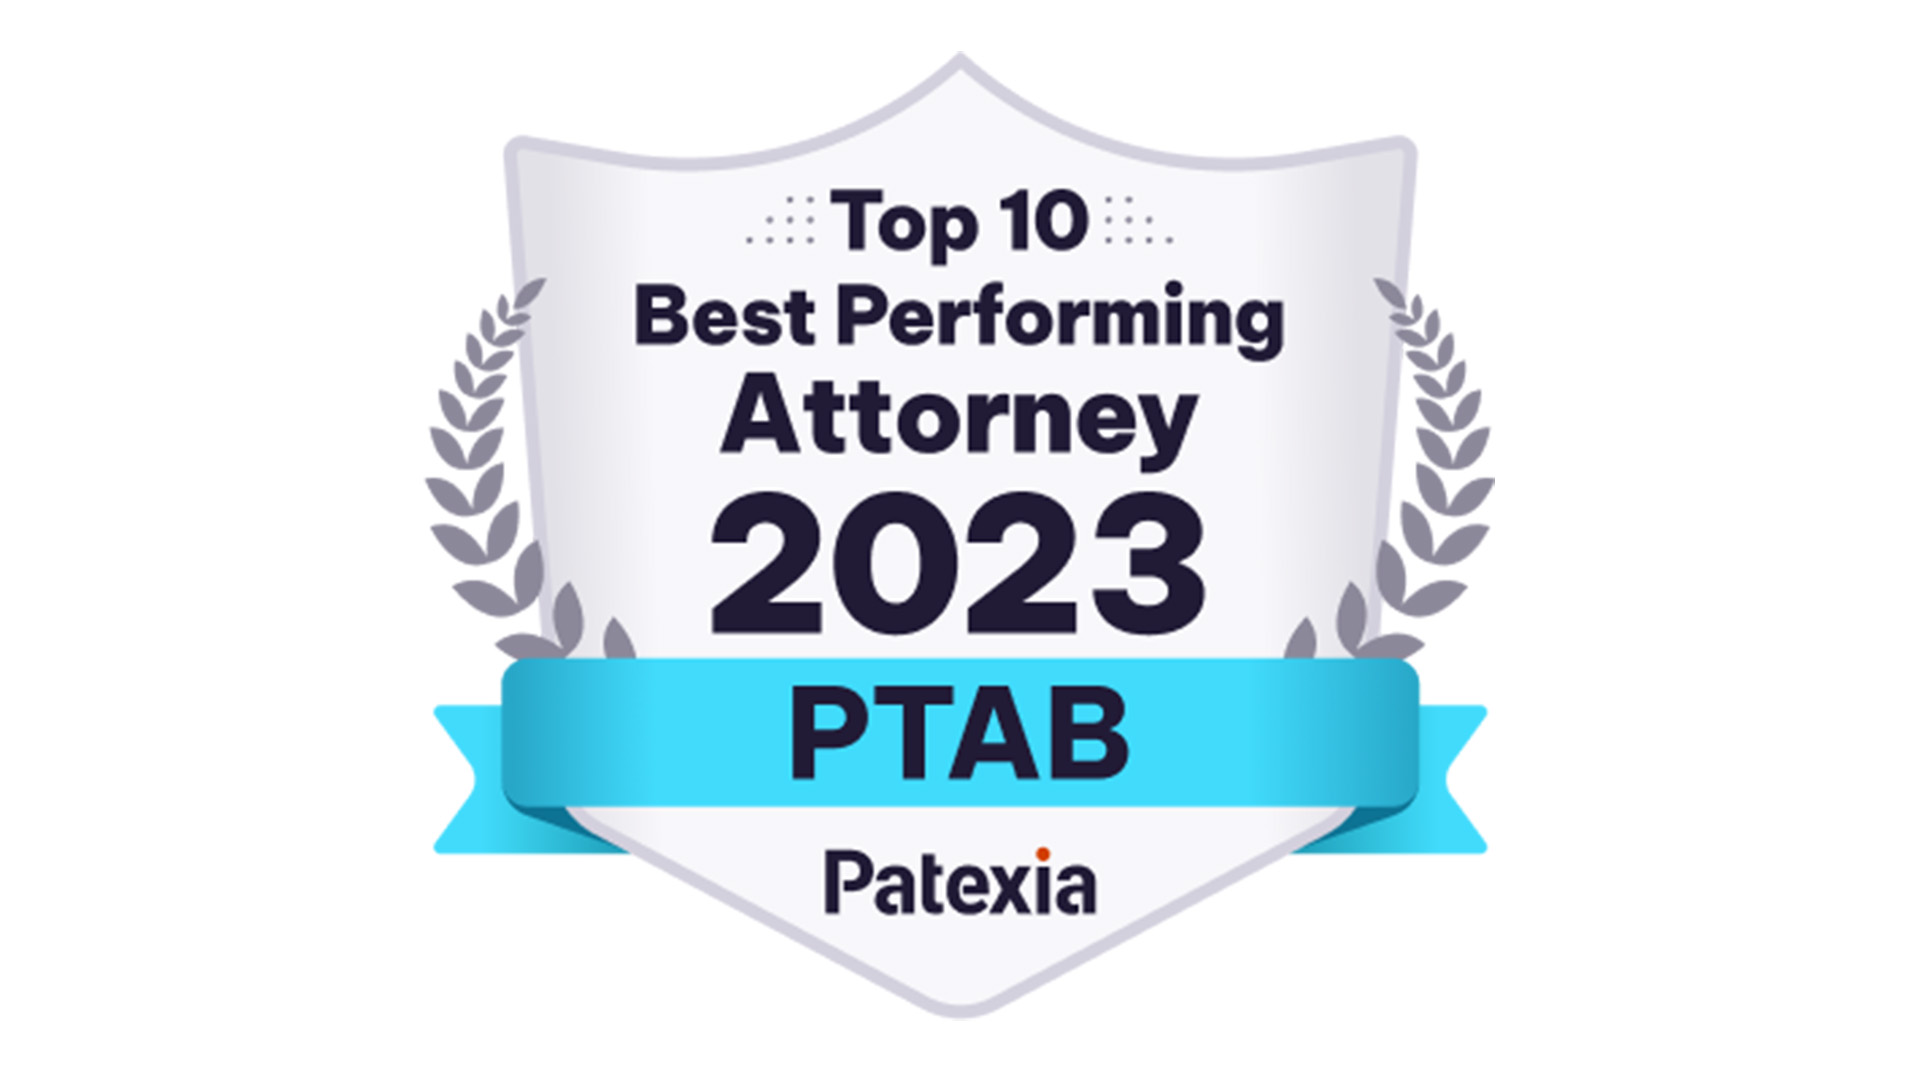 Top 10 Best Performing Attorney